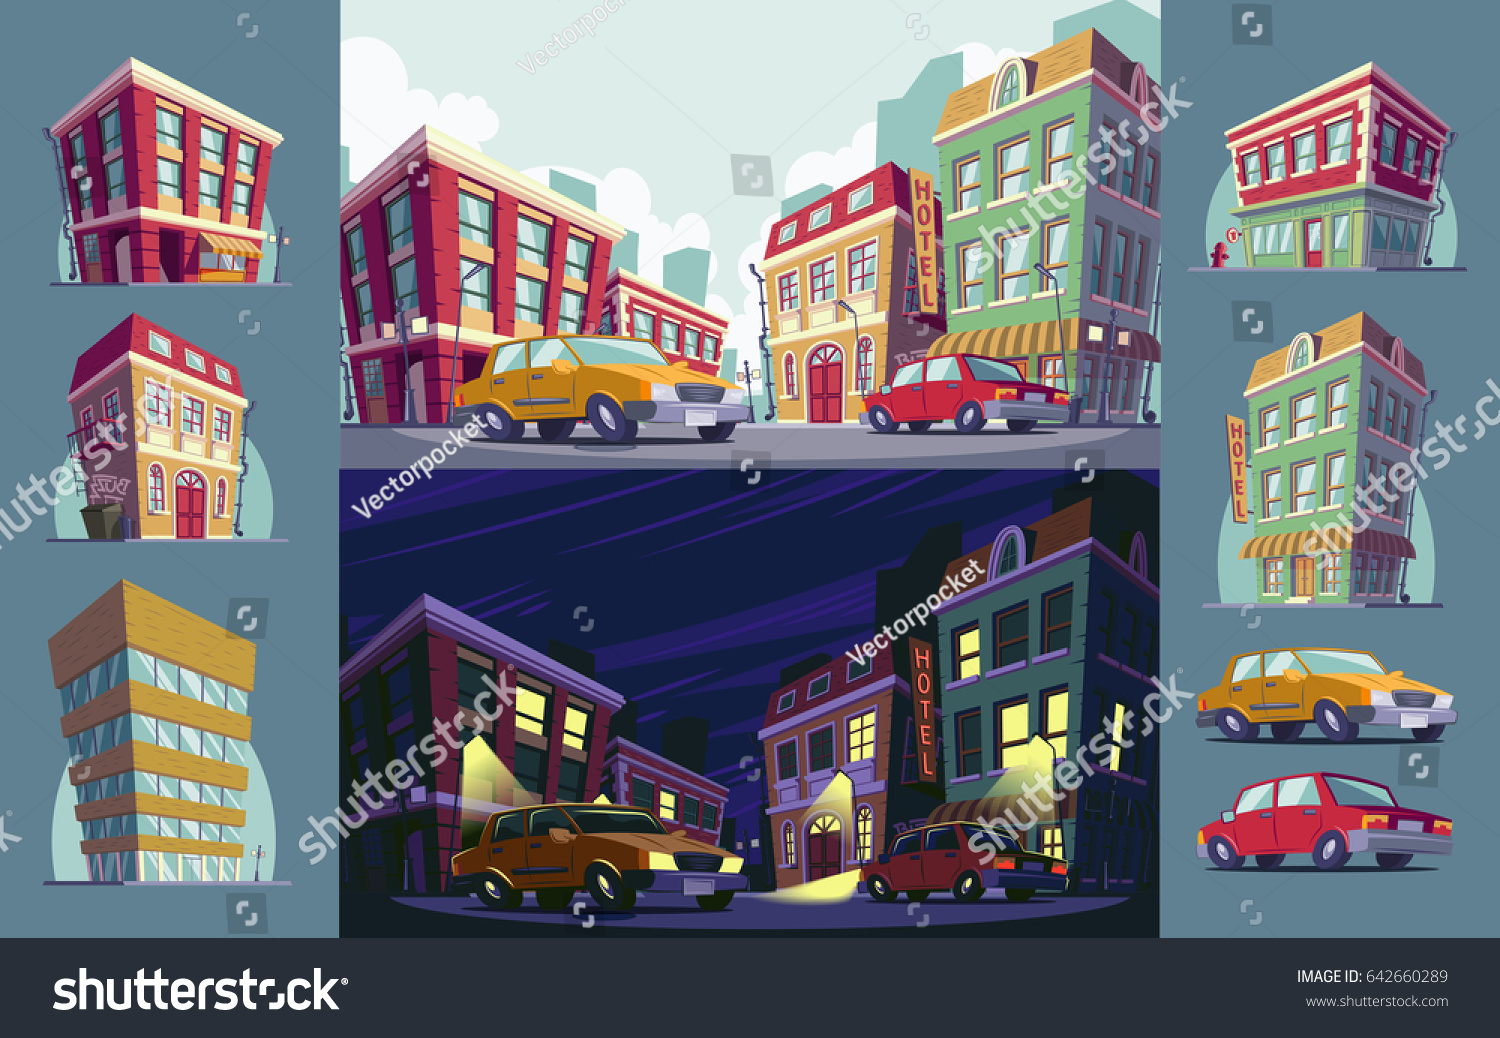 Set of cartoon illustrations of the historic urban area day and night, icons of buildings and cars in the cartoon style #642660289